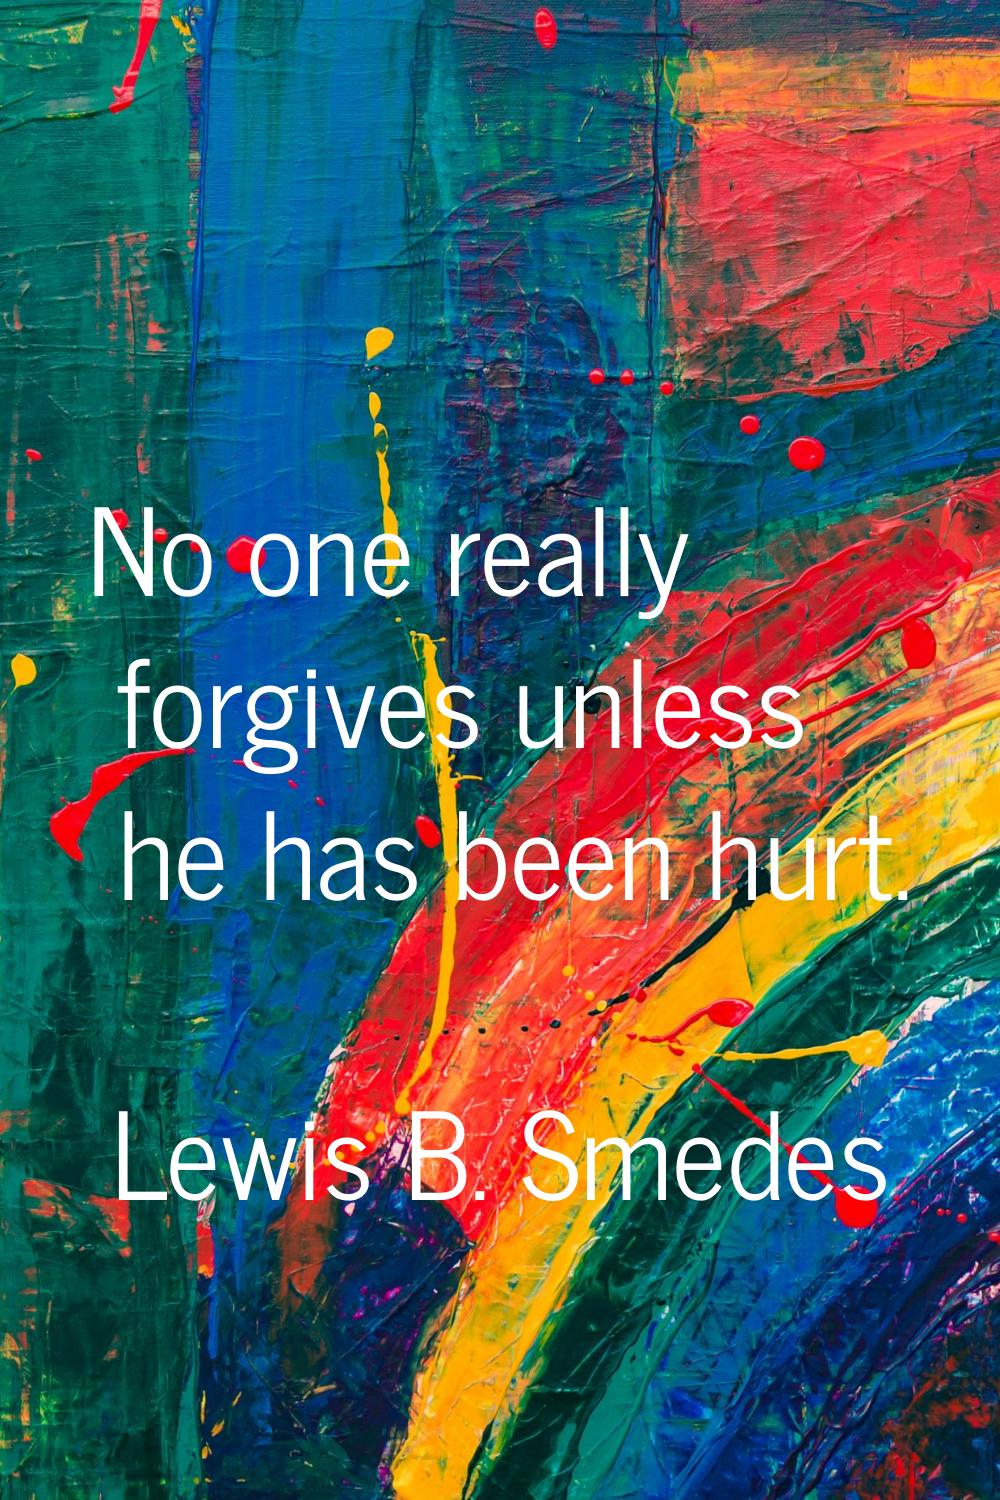 No one really forgives unless he has been hurt.